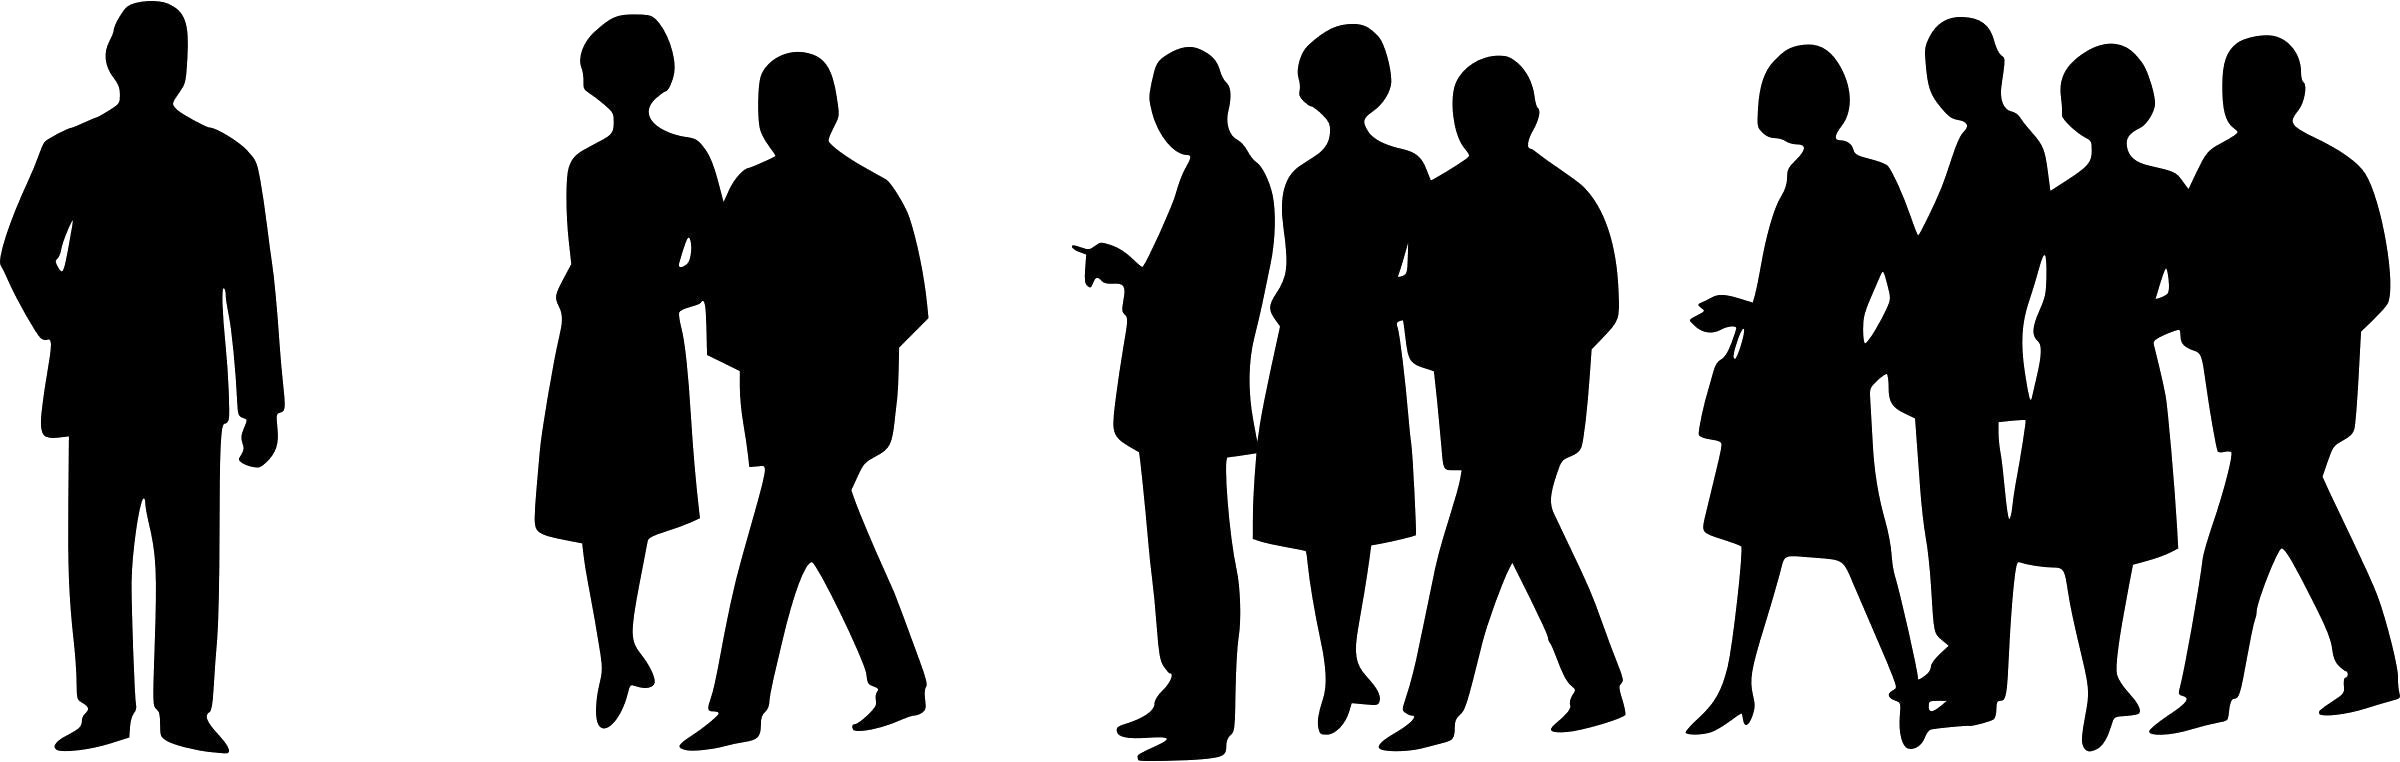 Crowd Silhouette Png Image File Png All Png All